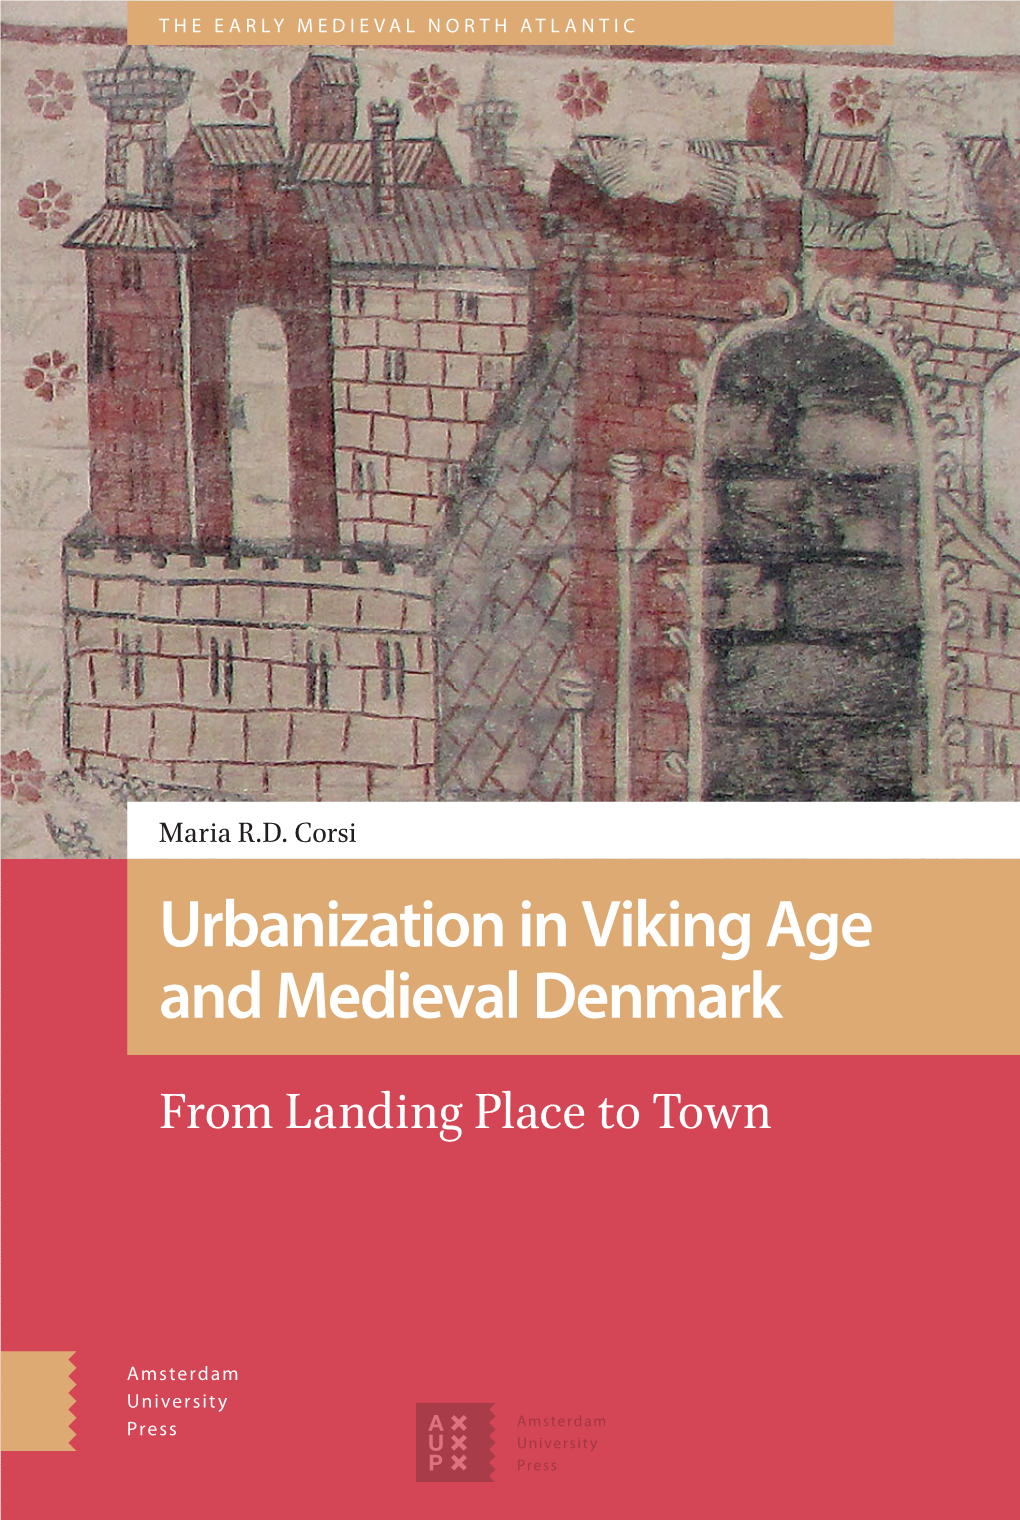 Urbanization in Viking Age and Medieval Denmark Medieval and Age Viking in Urbanization